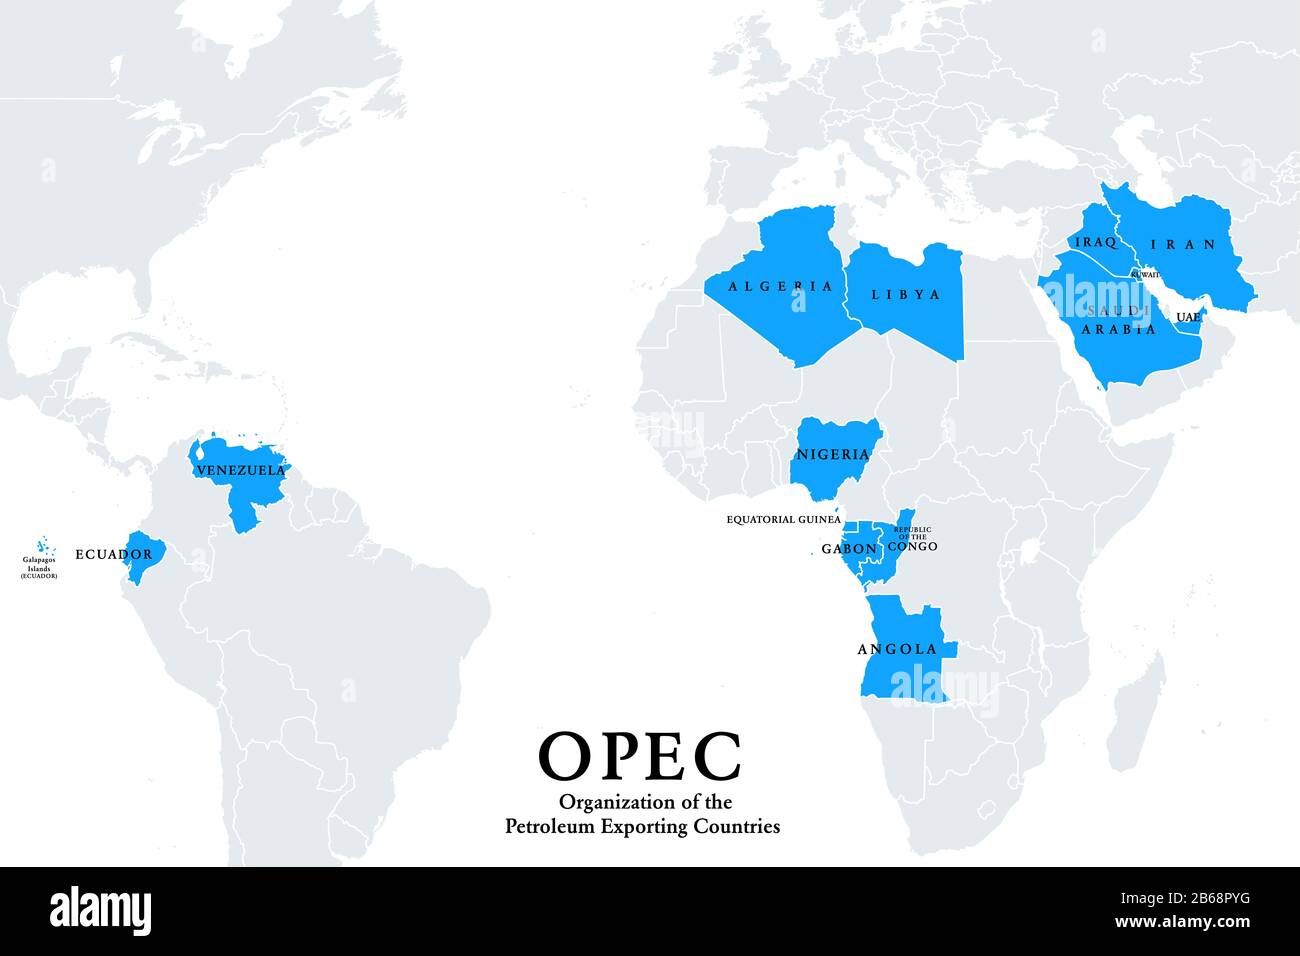 Opec Member States Political Map Organization Of Petroleum Exporting Countries Organization Of 14 Nations Giving A Major Influence On Oil Price 2B68PYG 